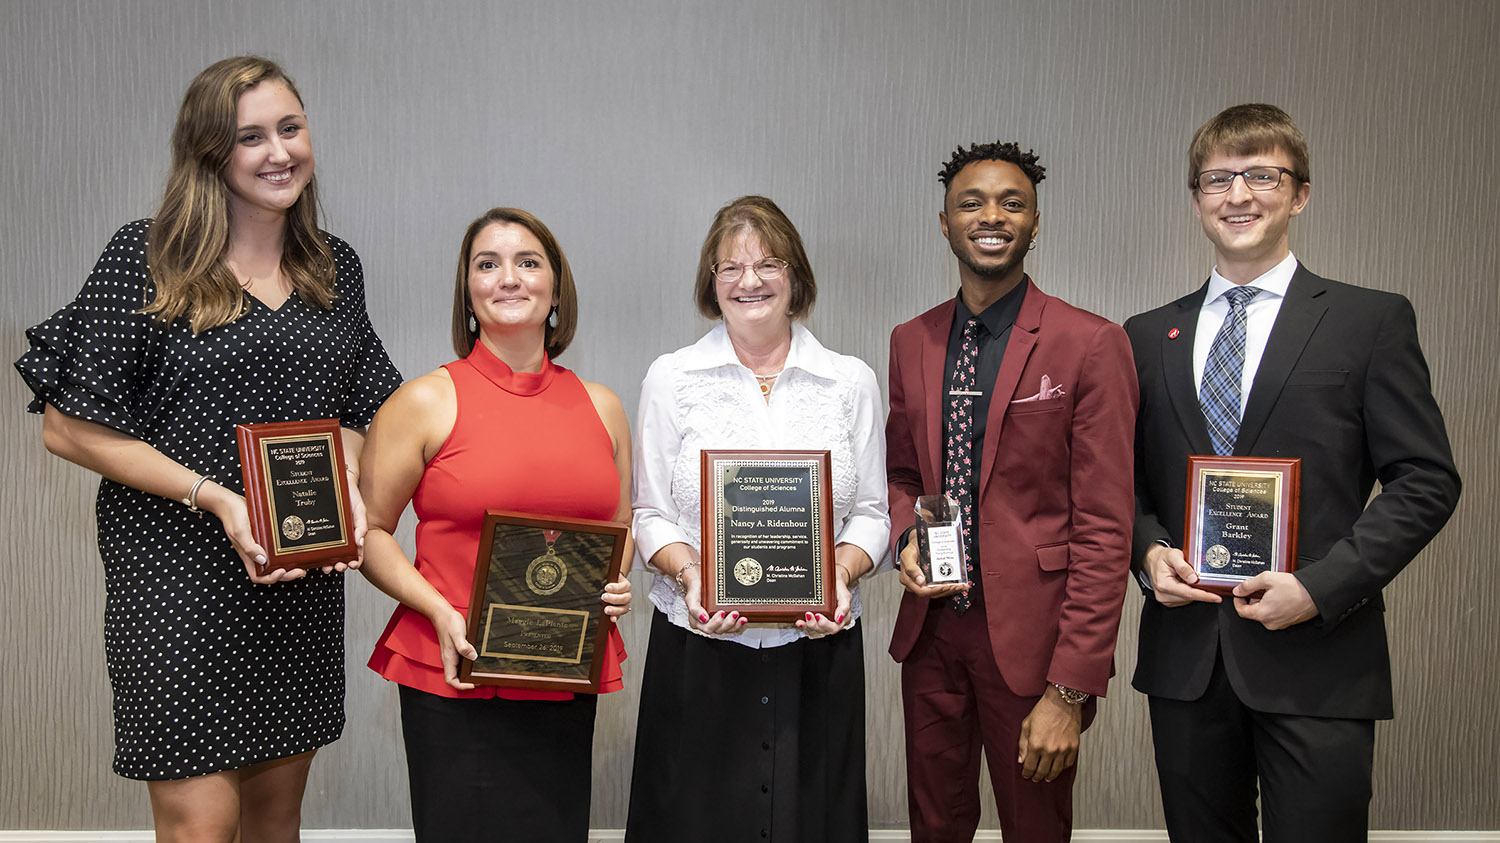 Natalie Truby, Student Excellence Award; Maggie LaPlante, Zenith Medal for Service; Nancy Ridenhour, Distinguished Alumnus Award; Jamal Moss, Outstanding Young Alumnus Award; and Grant Barkley, Student Excellence Award